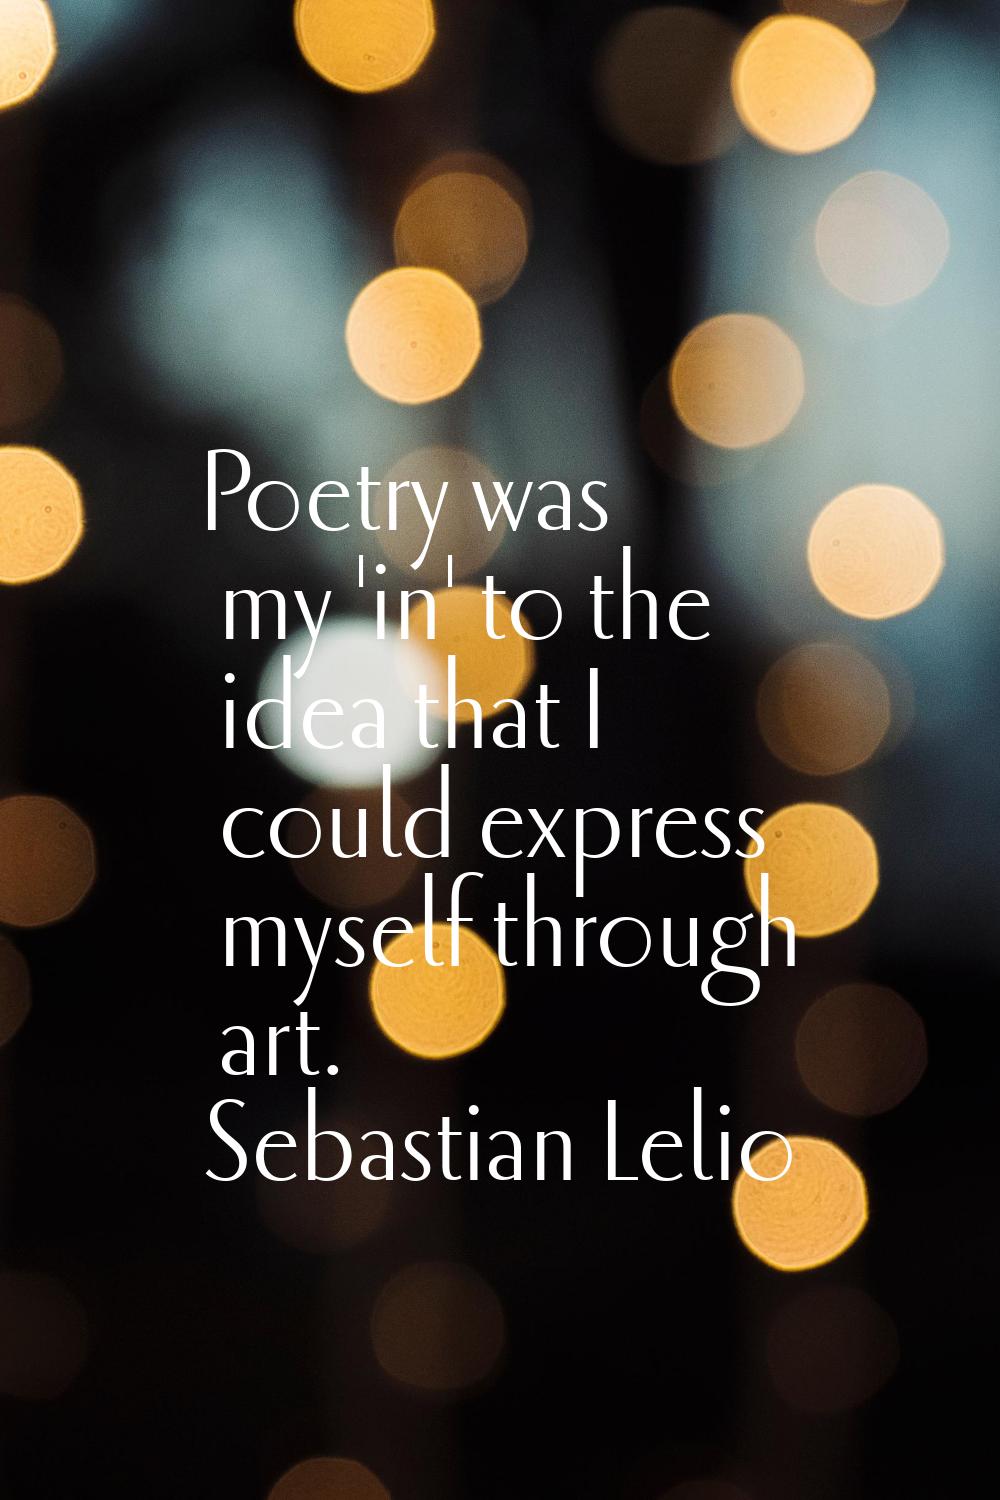 Poetry was my 'in' to the idea that I could express myself through art.